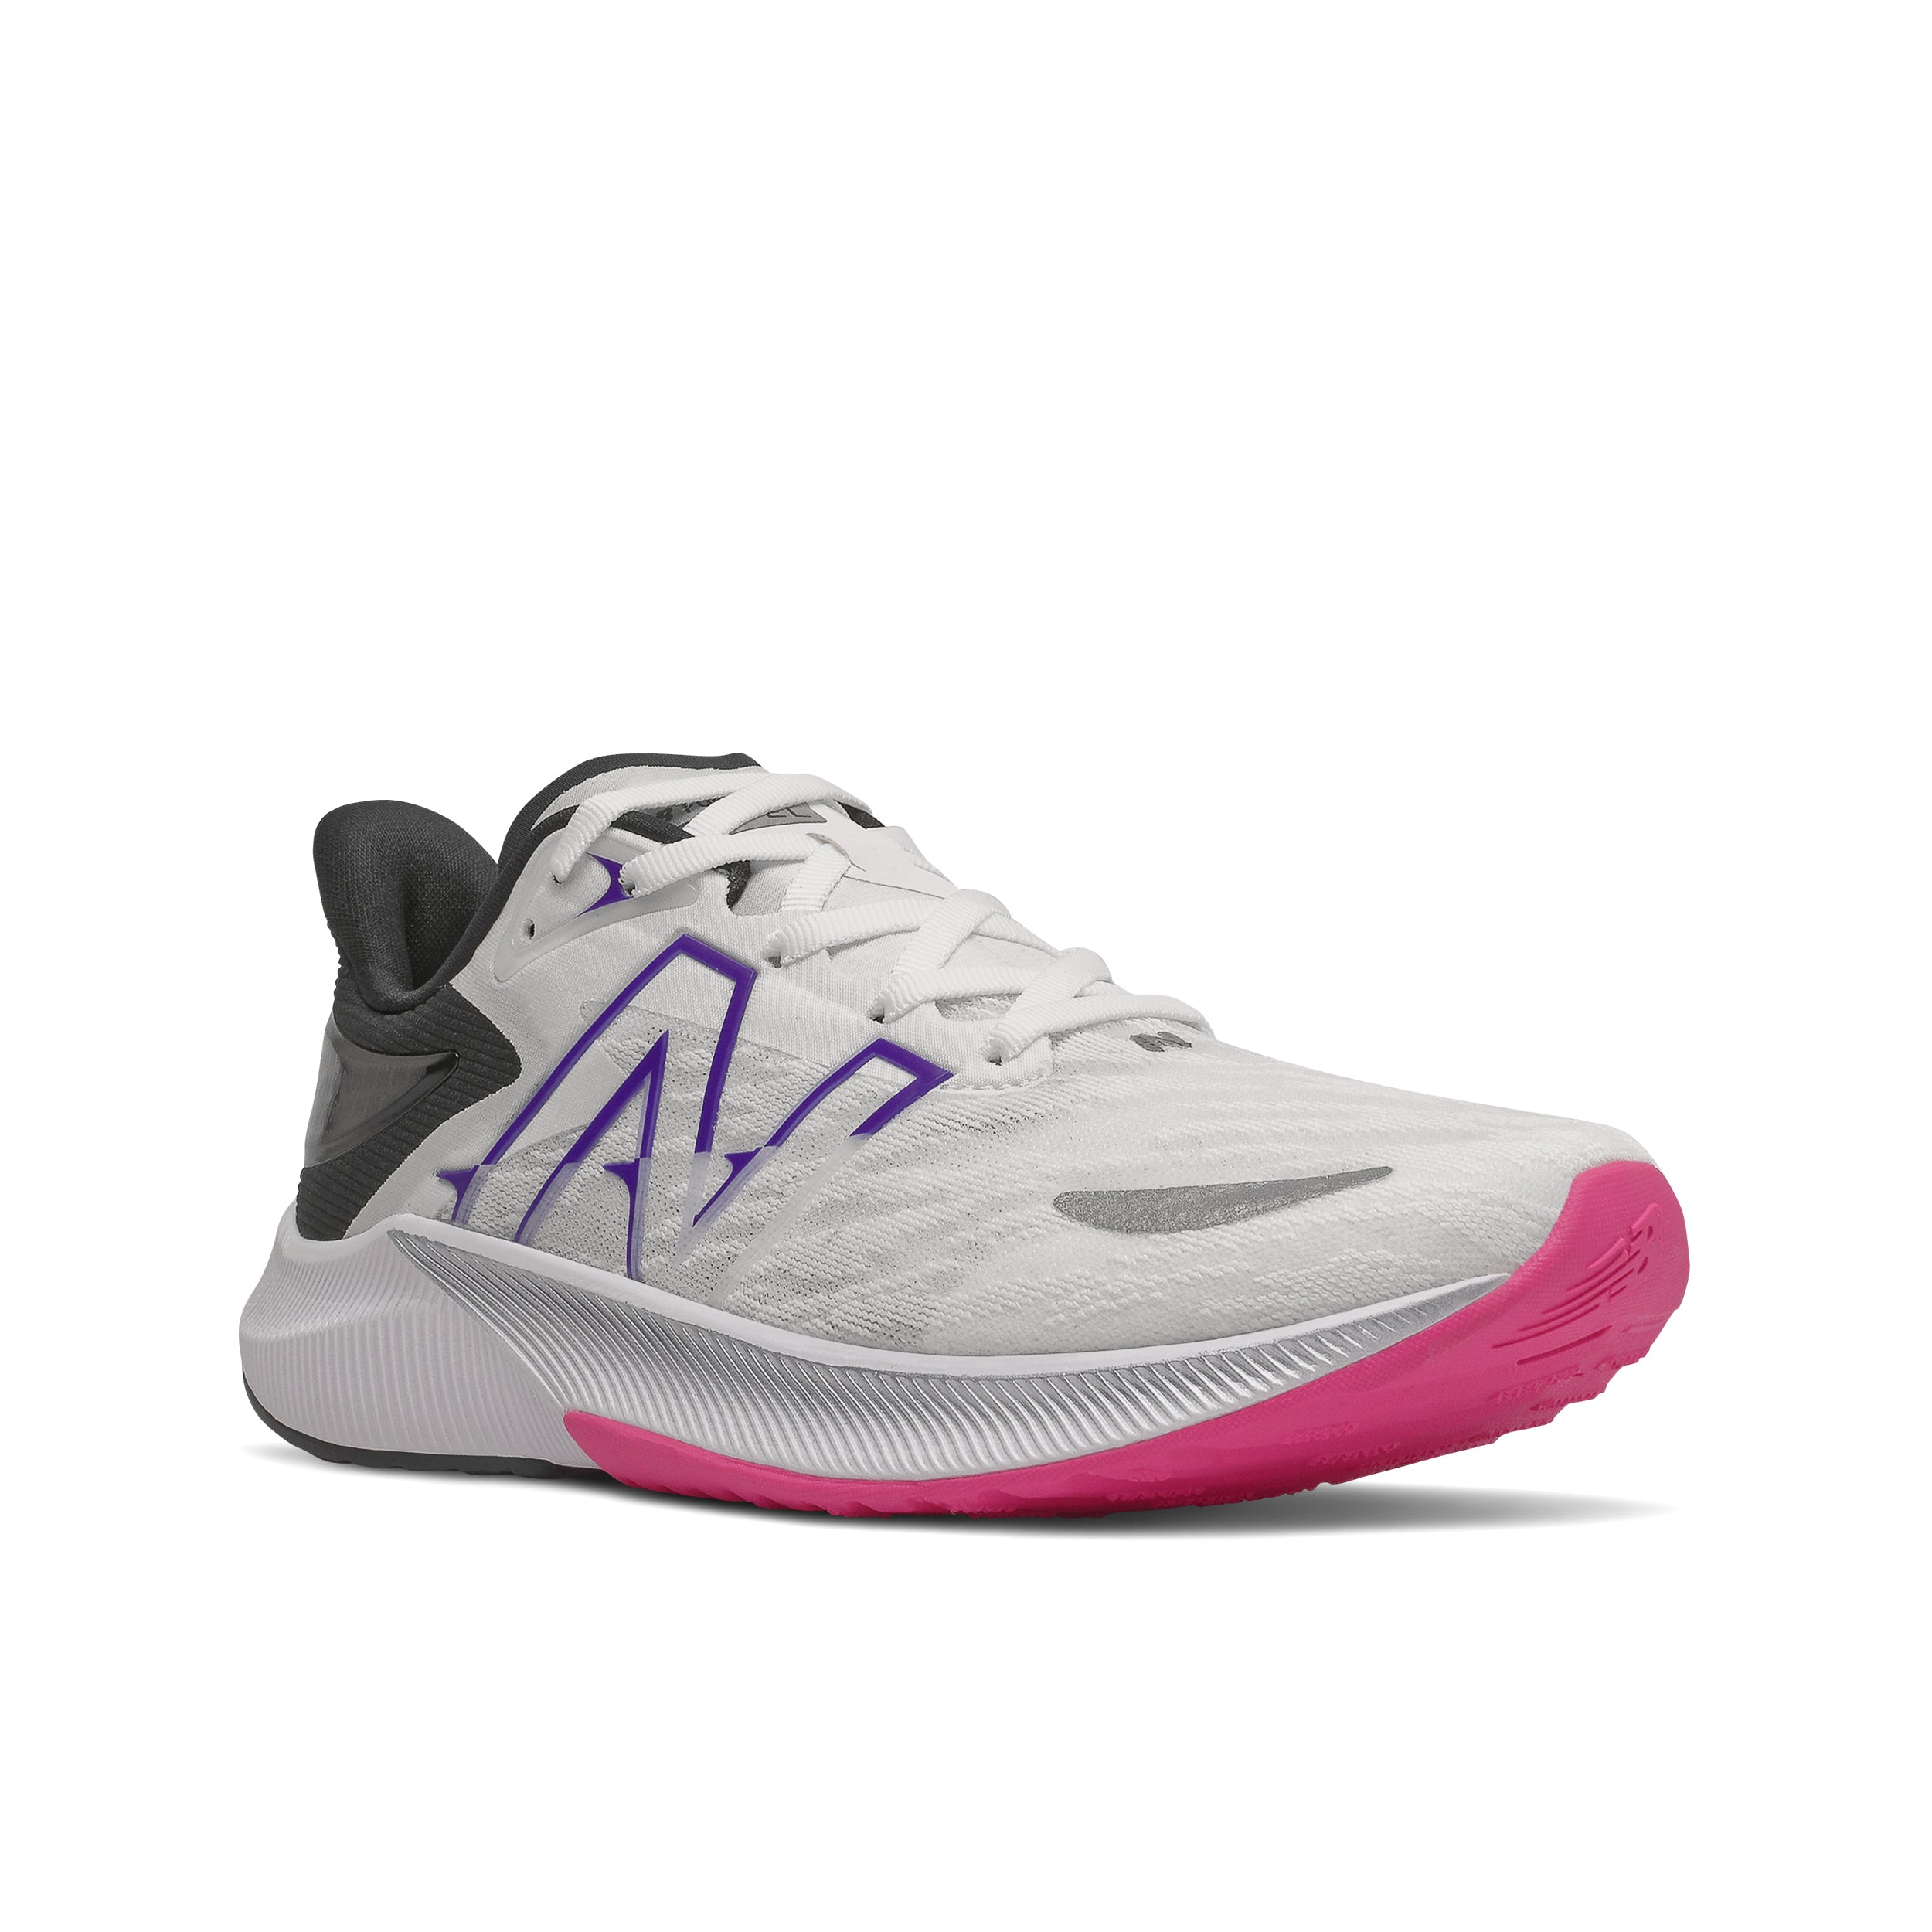 New Balance FuelCell Propel v3 WFCPRLM3 Women's1